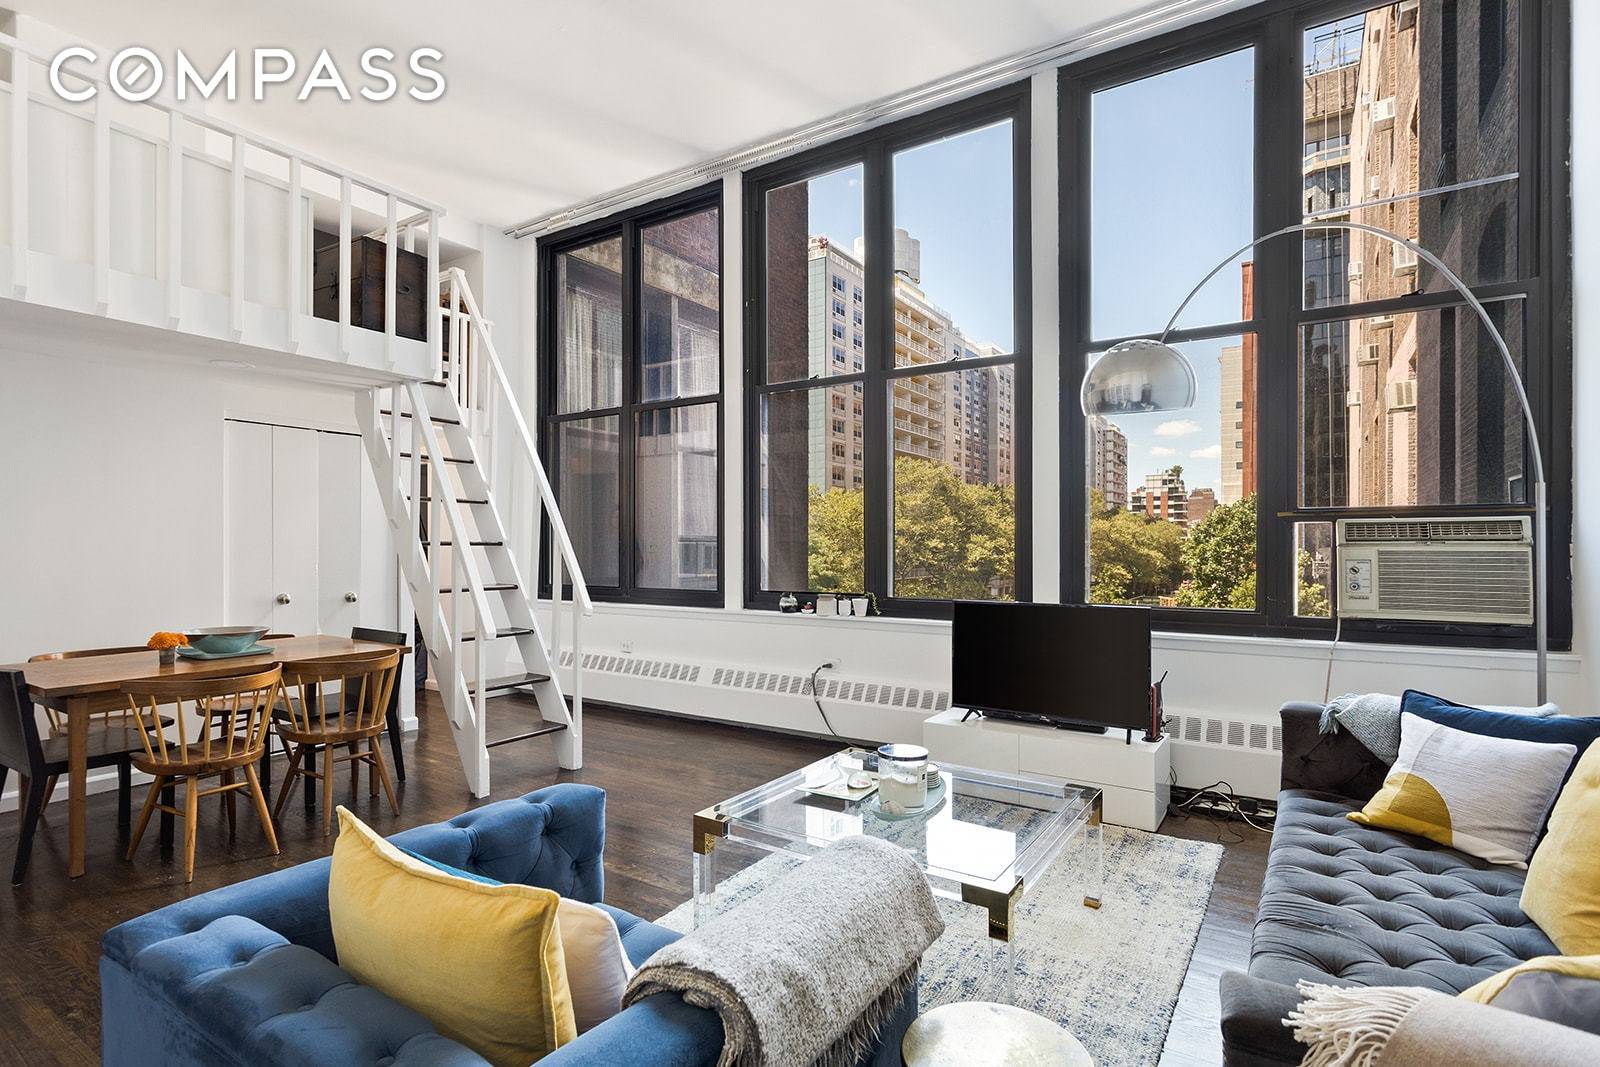 Located at the nexus of Greenwich Village, Soho, and Noho, apartment D304 at 250 Mercer is an airy, light filled 1 bedroom sleeping loft, boasting 13 ft ceilings and a ...